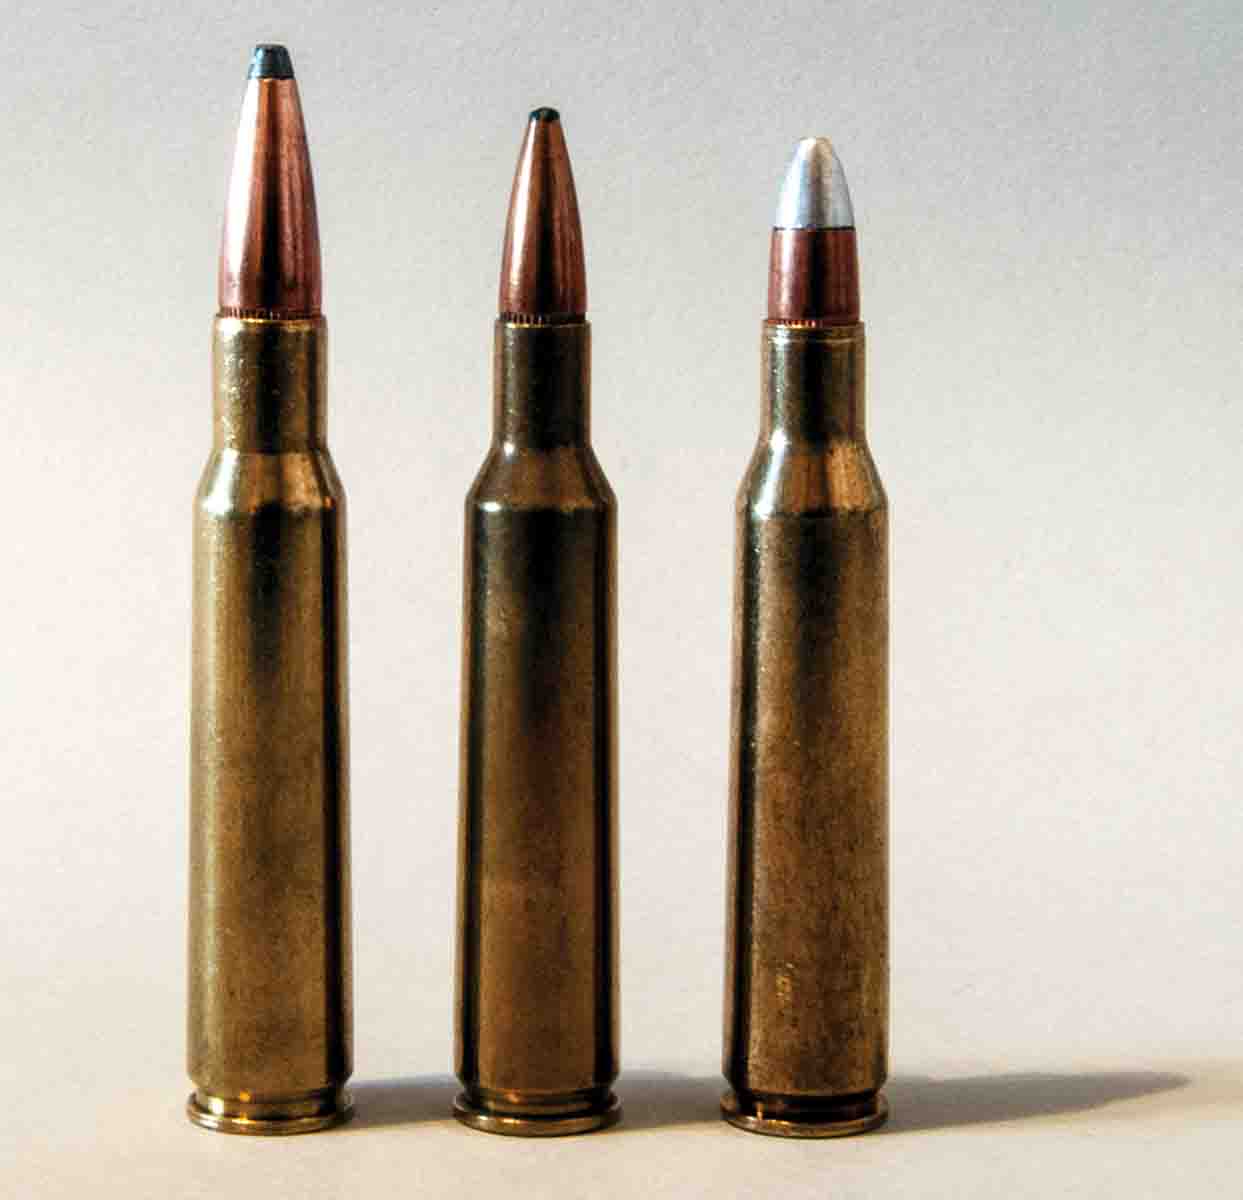 The 7x57 Mauser (left) was the base case for the 6mm Remington (center) and the .257 Roberts (right). The 7x57 will handle a broader range of bullet weights.